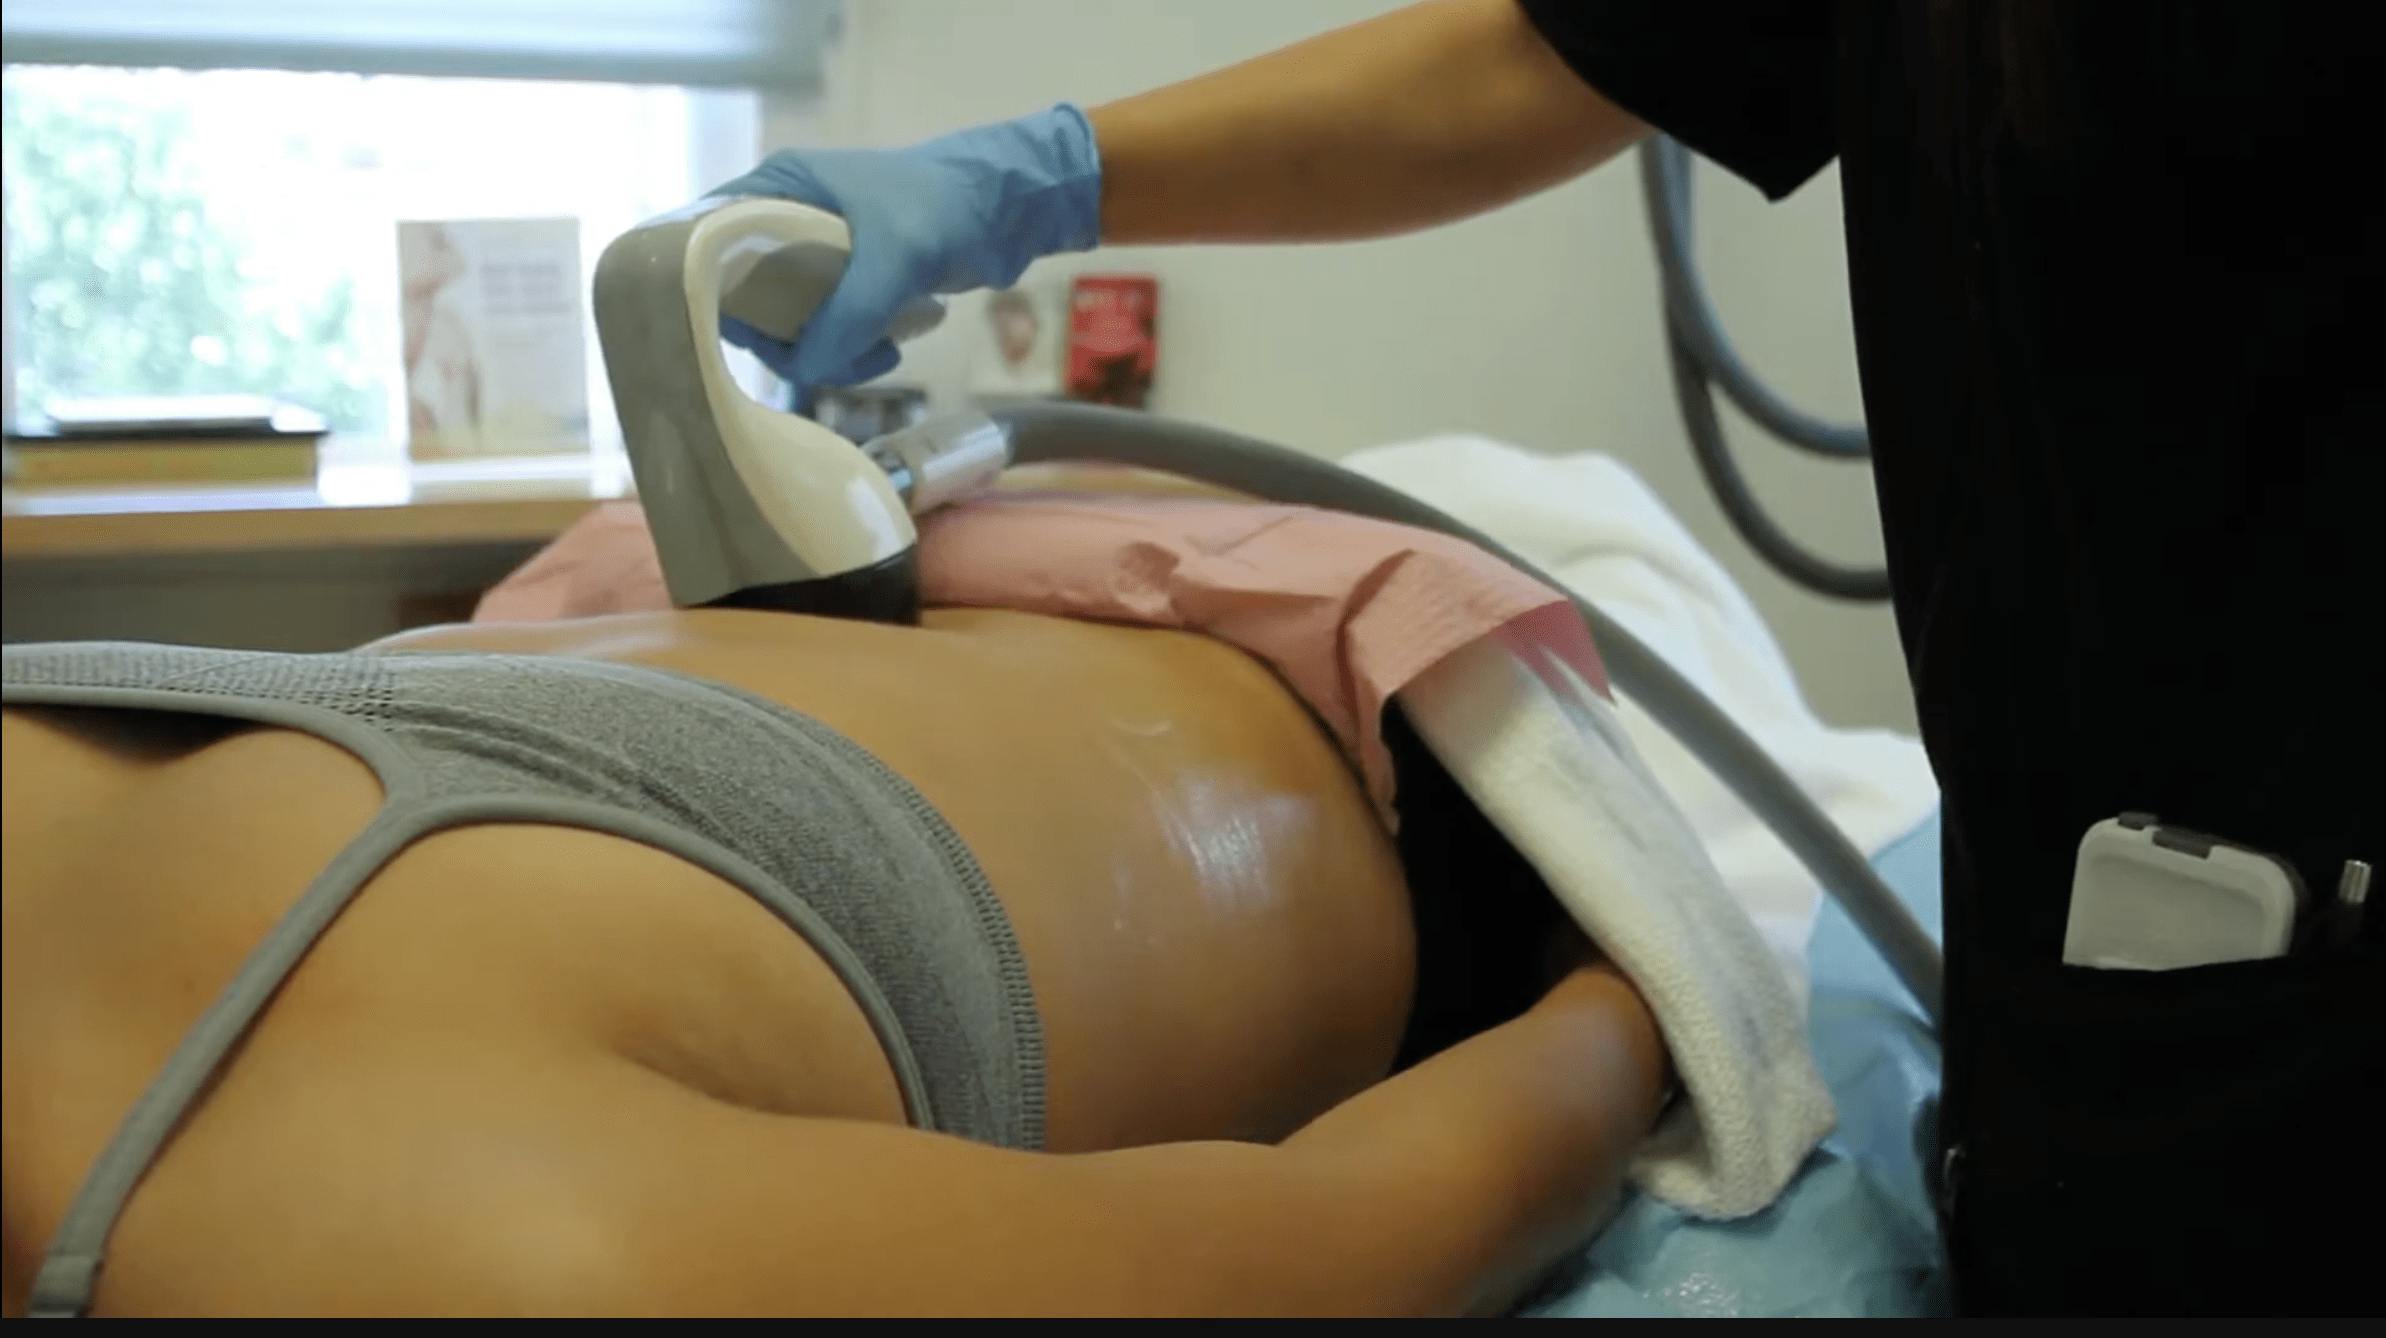 woman getting her a treatment on her stomach